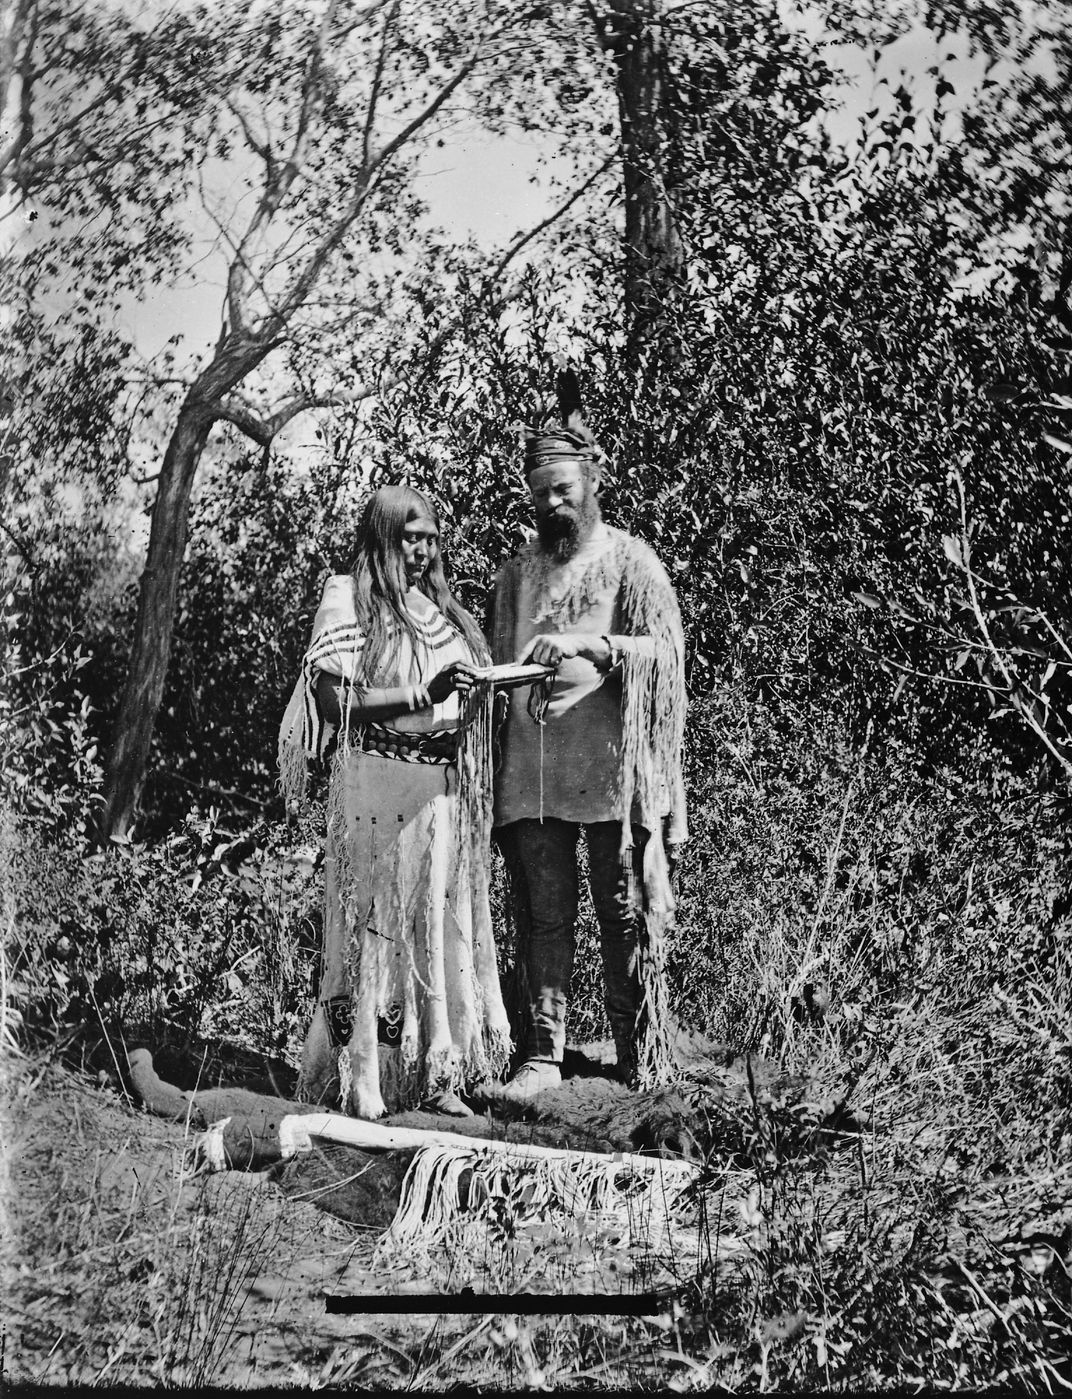 John Wesley Powell with Native American Woman